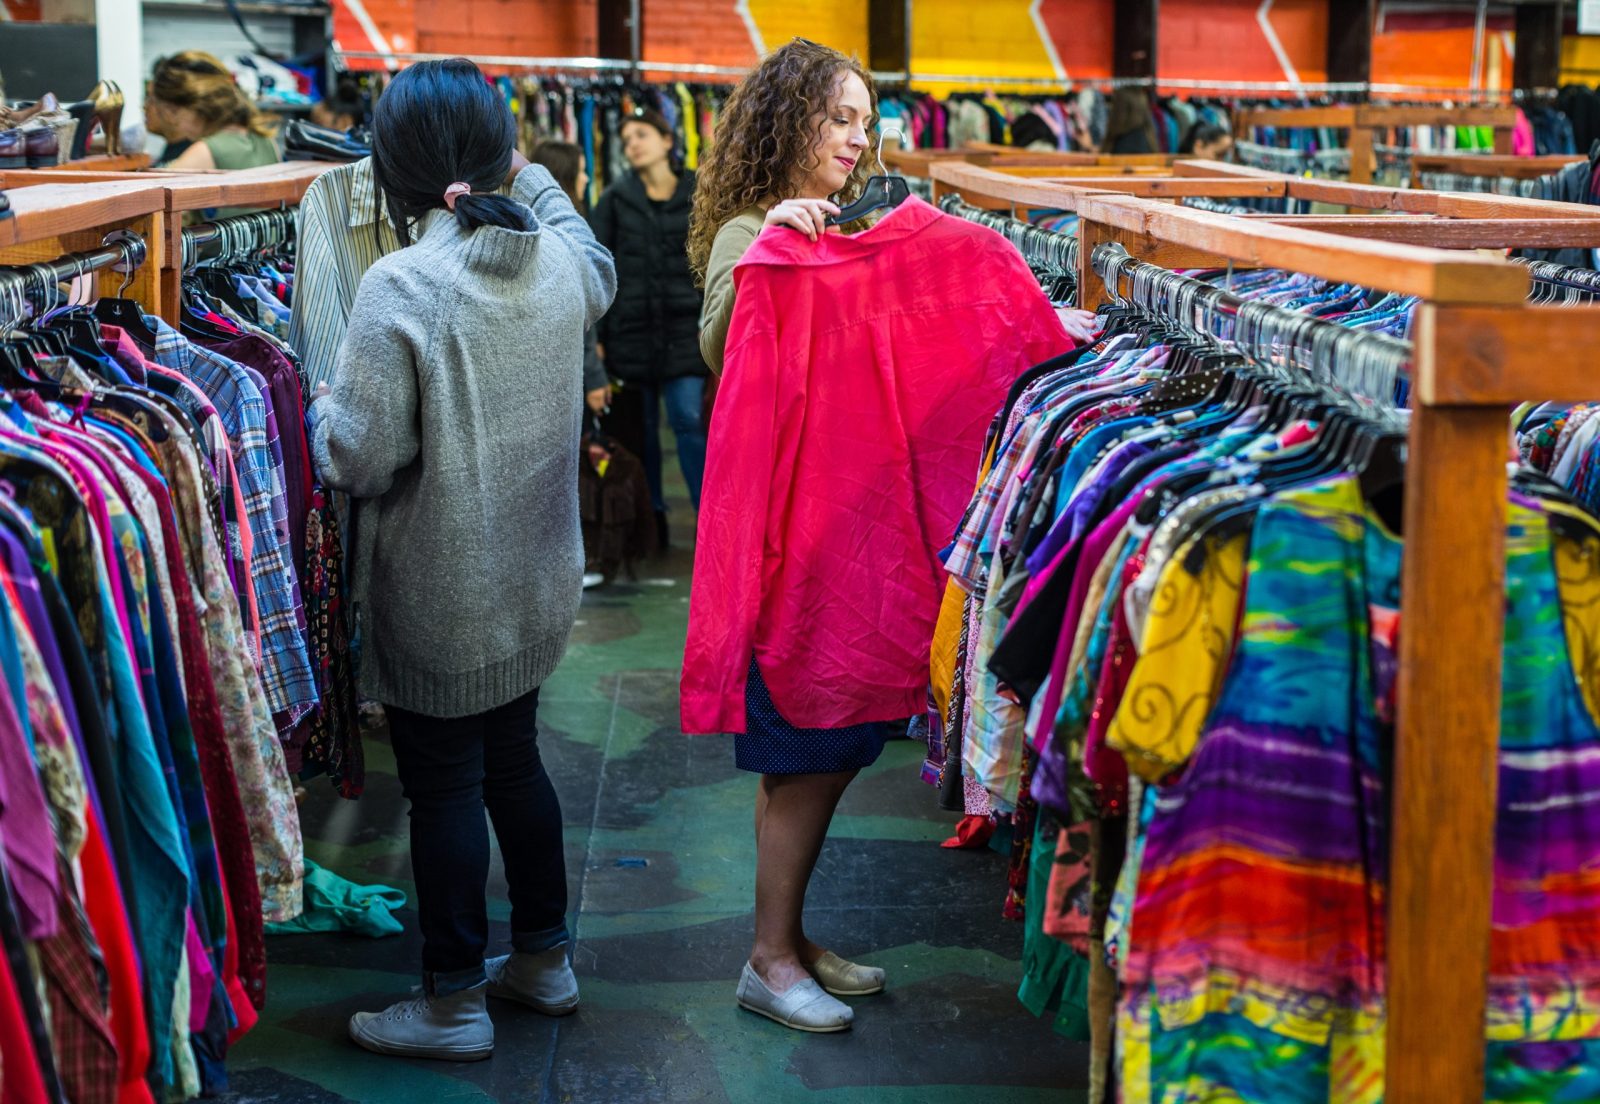 Women looking at clothes in a thrift store